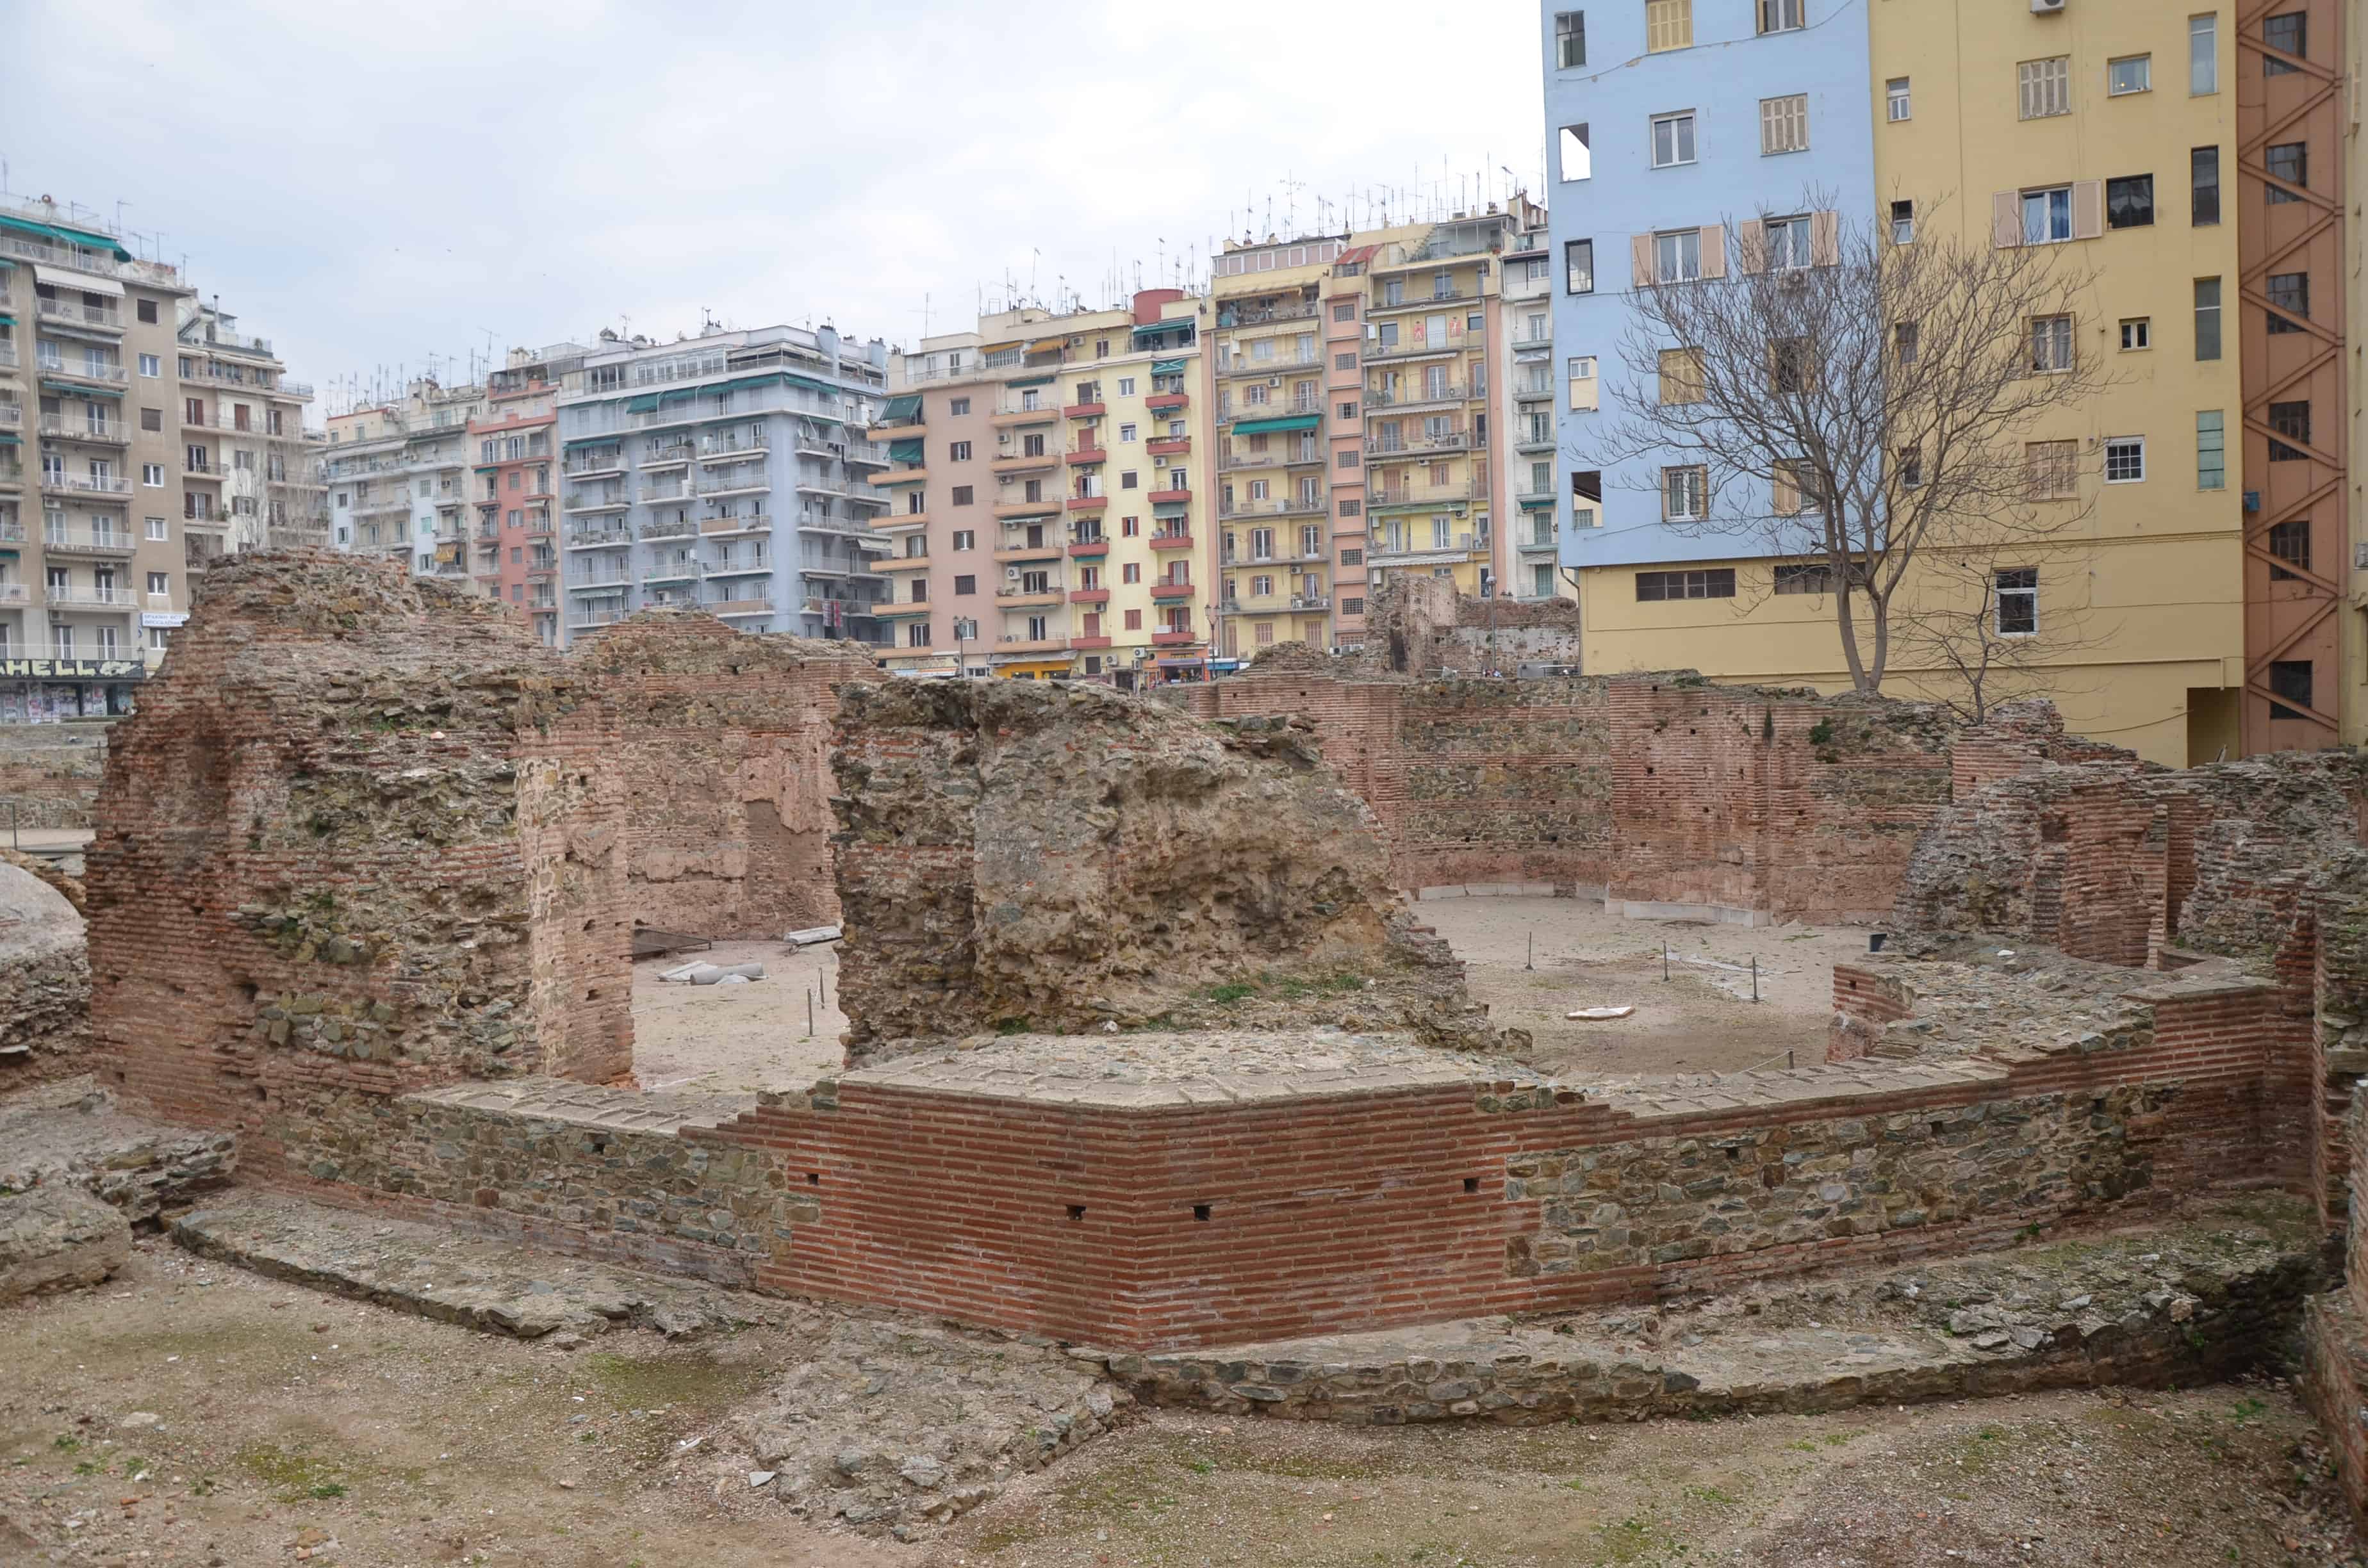 Palace of Galerius in Thessaloniki, Greece